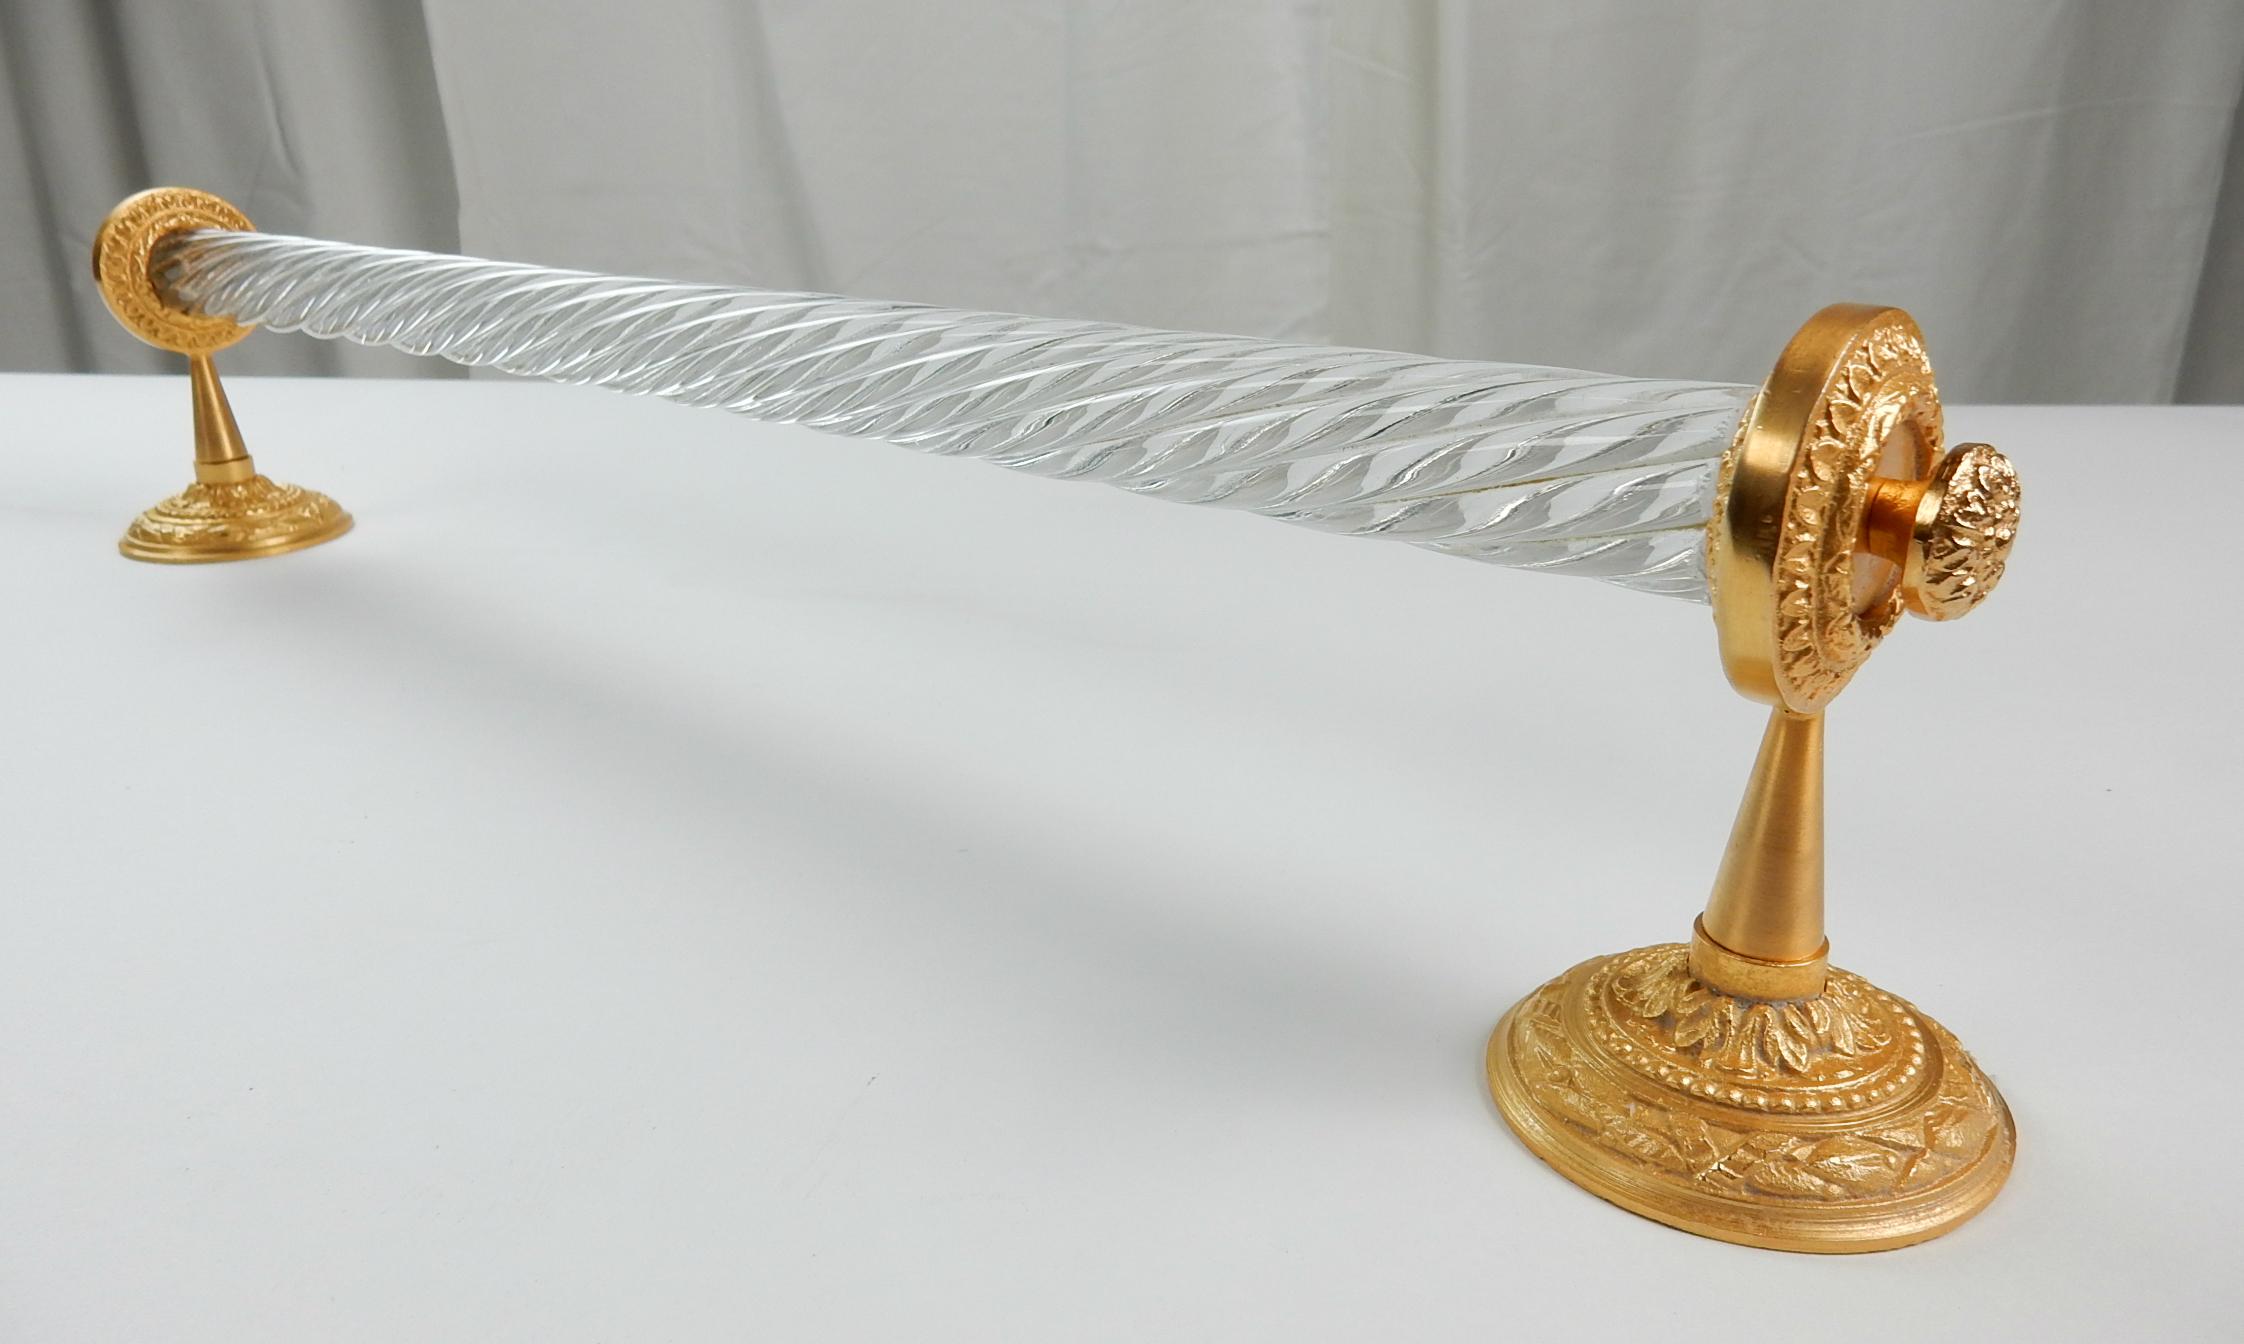 Baroque Revival Sherle Wagner Collection Glass Towel Bar, circa 1960s